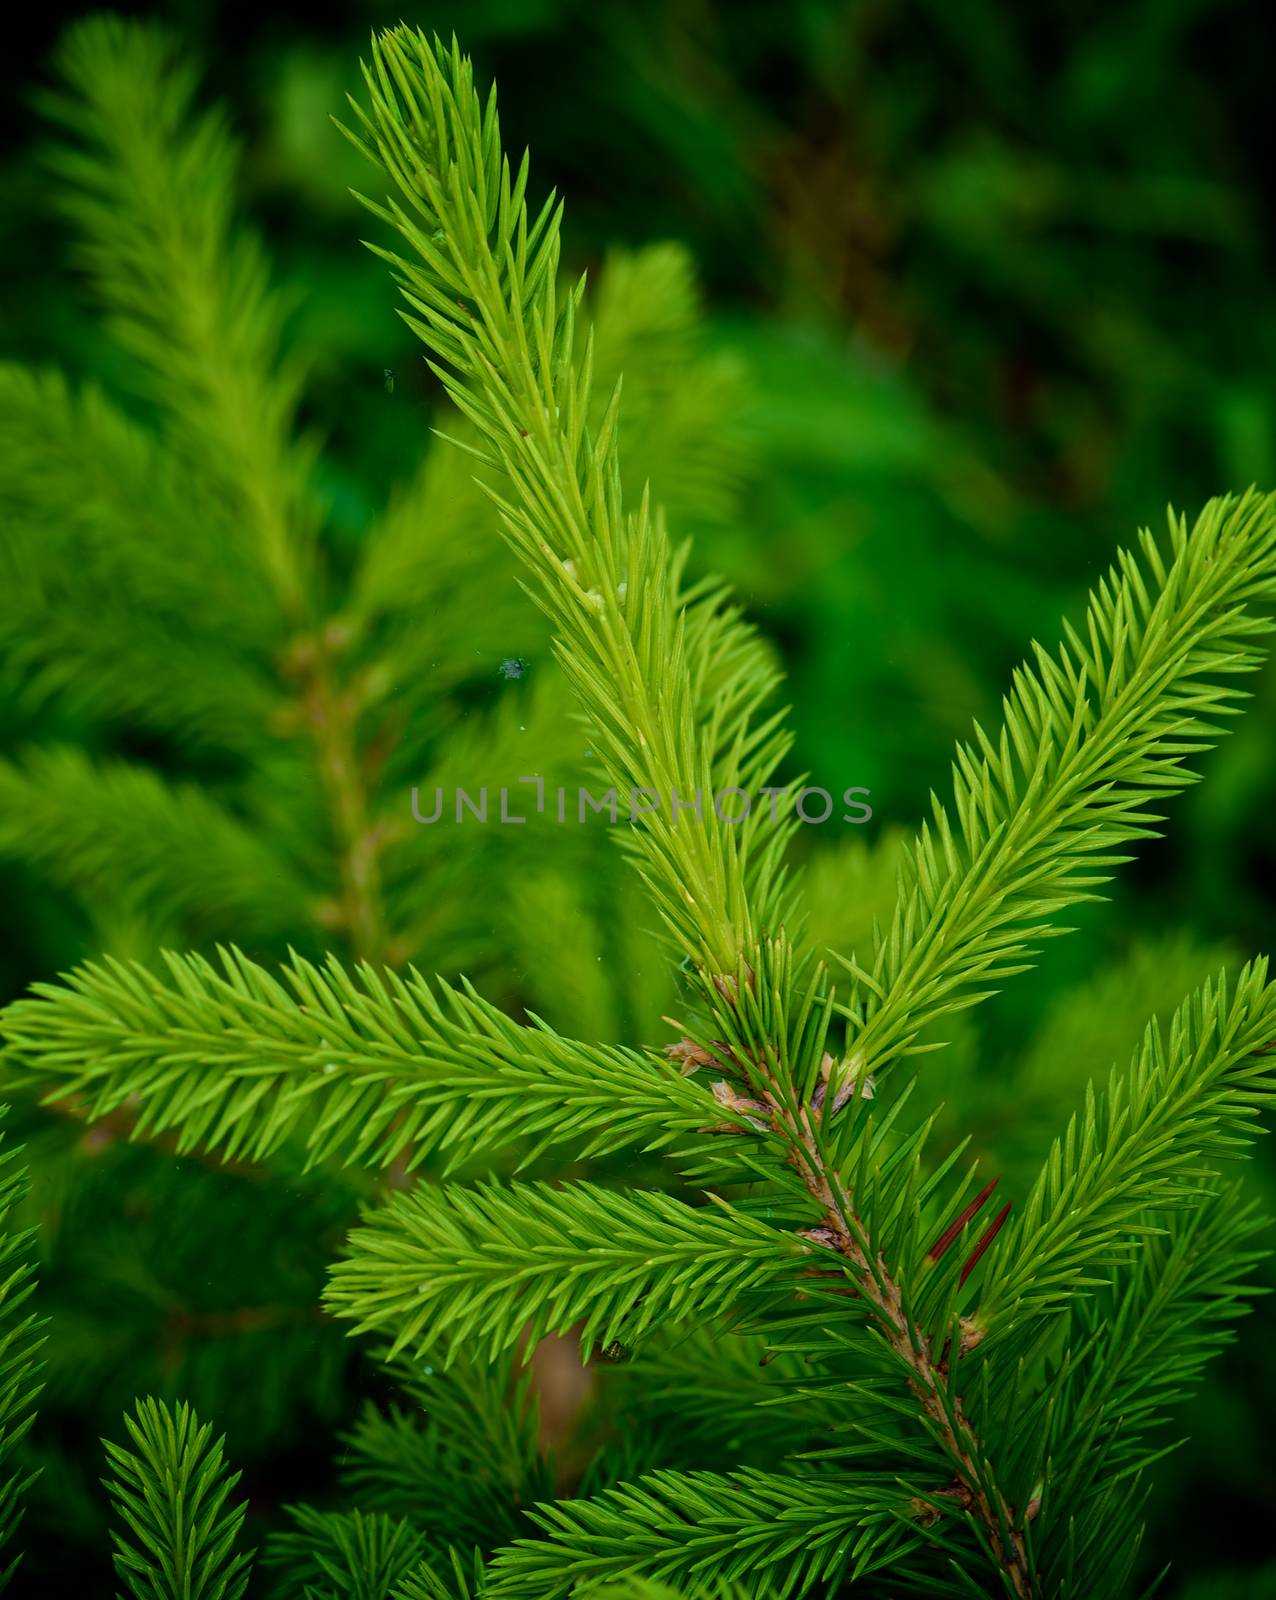 Young Green Spruce Shoots closeup on Natural Environment background Outdoors